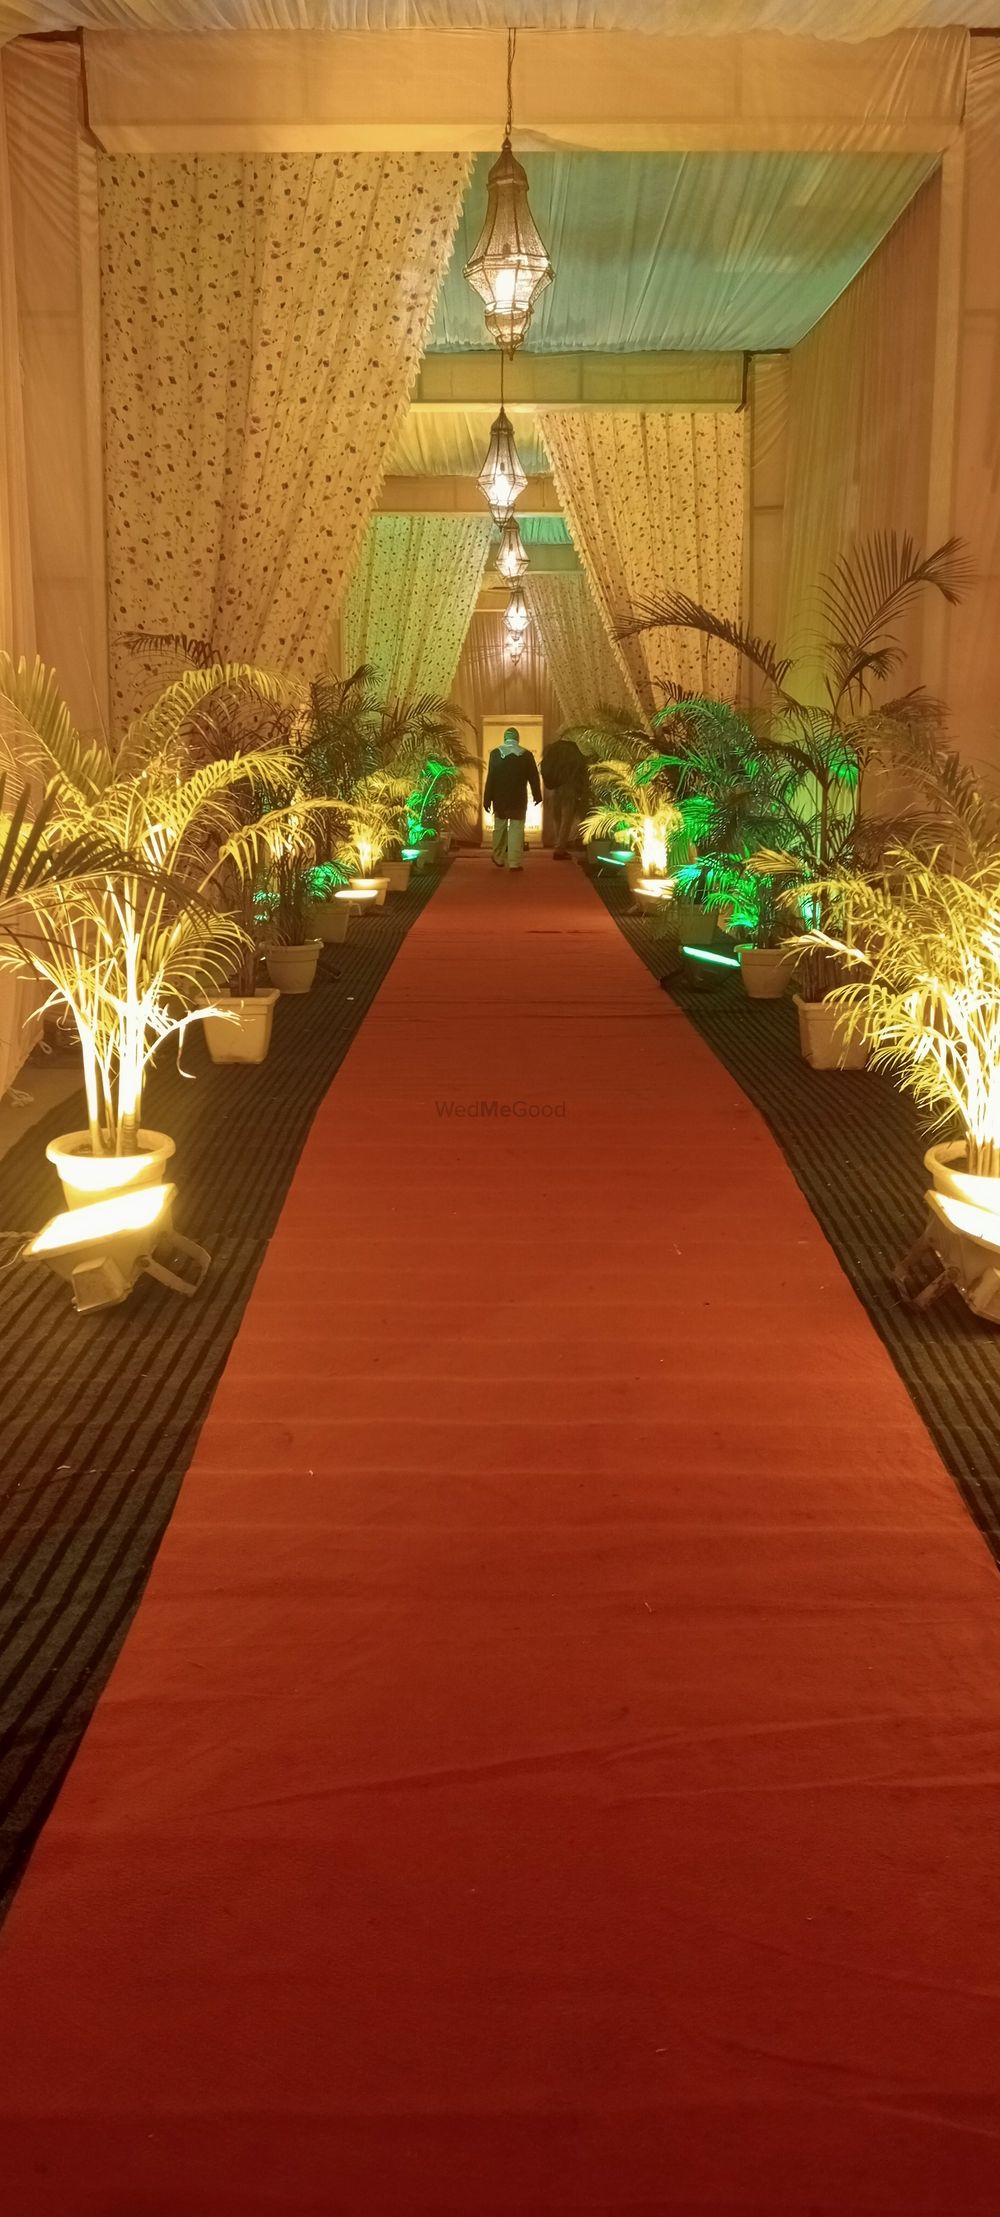 Photo From wedding event at Rajput bhawan 4 imli - By Celebration Caterer & Event Management